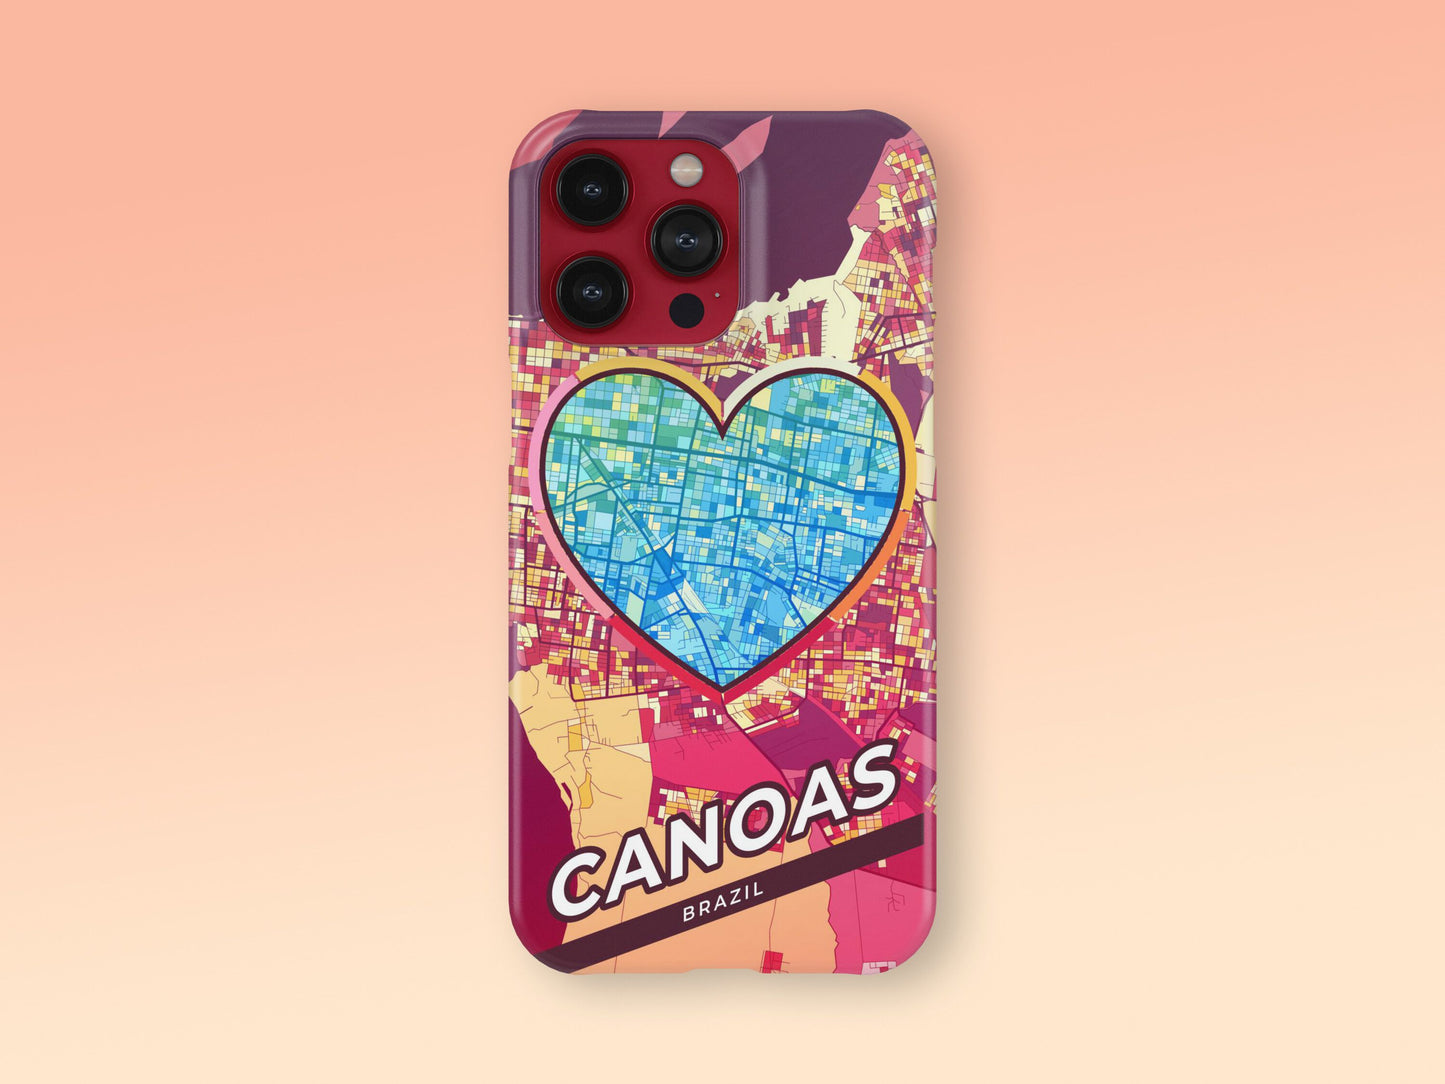 Canoas Brazil slim phone case with colorful icon. Birthday, wedding or housewarming gift. Couple match cases. 2